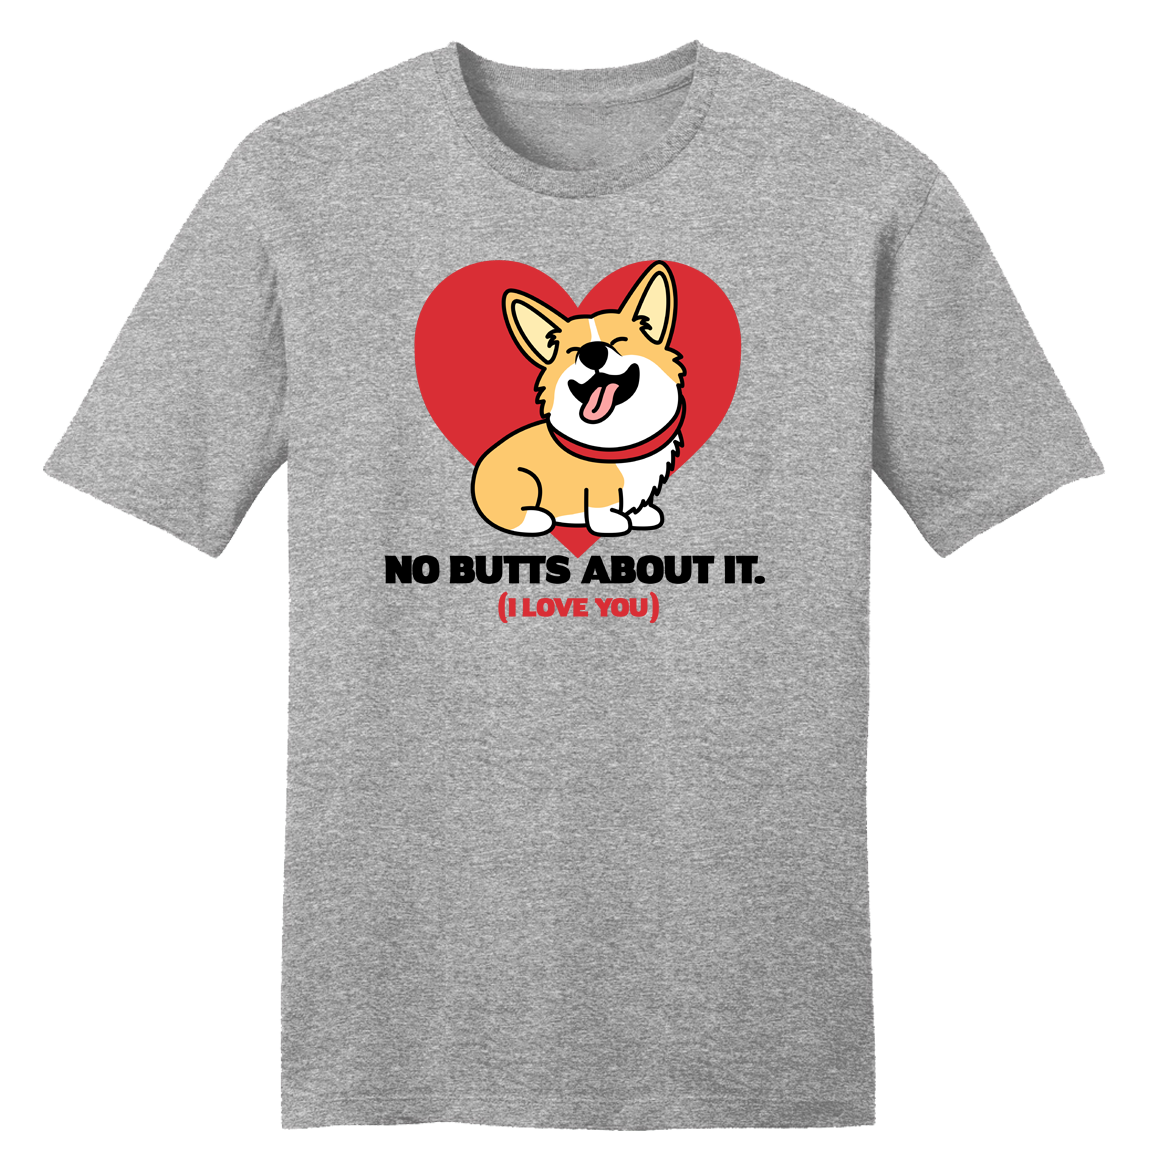 No Butts About It tee